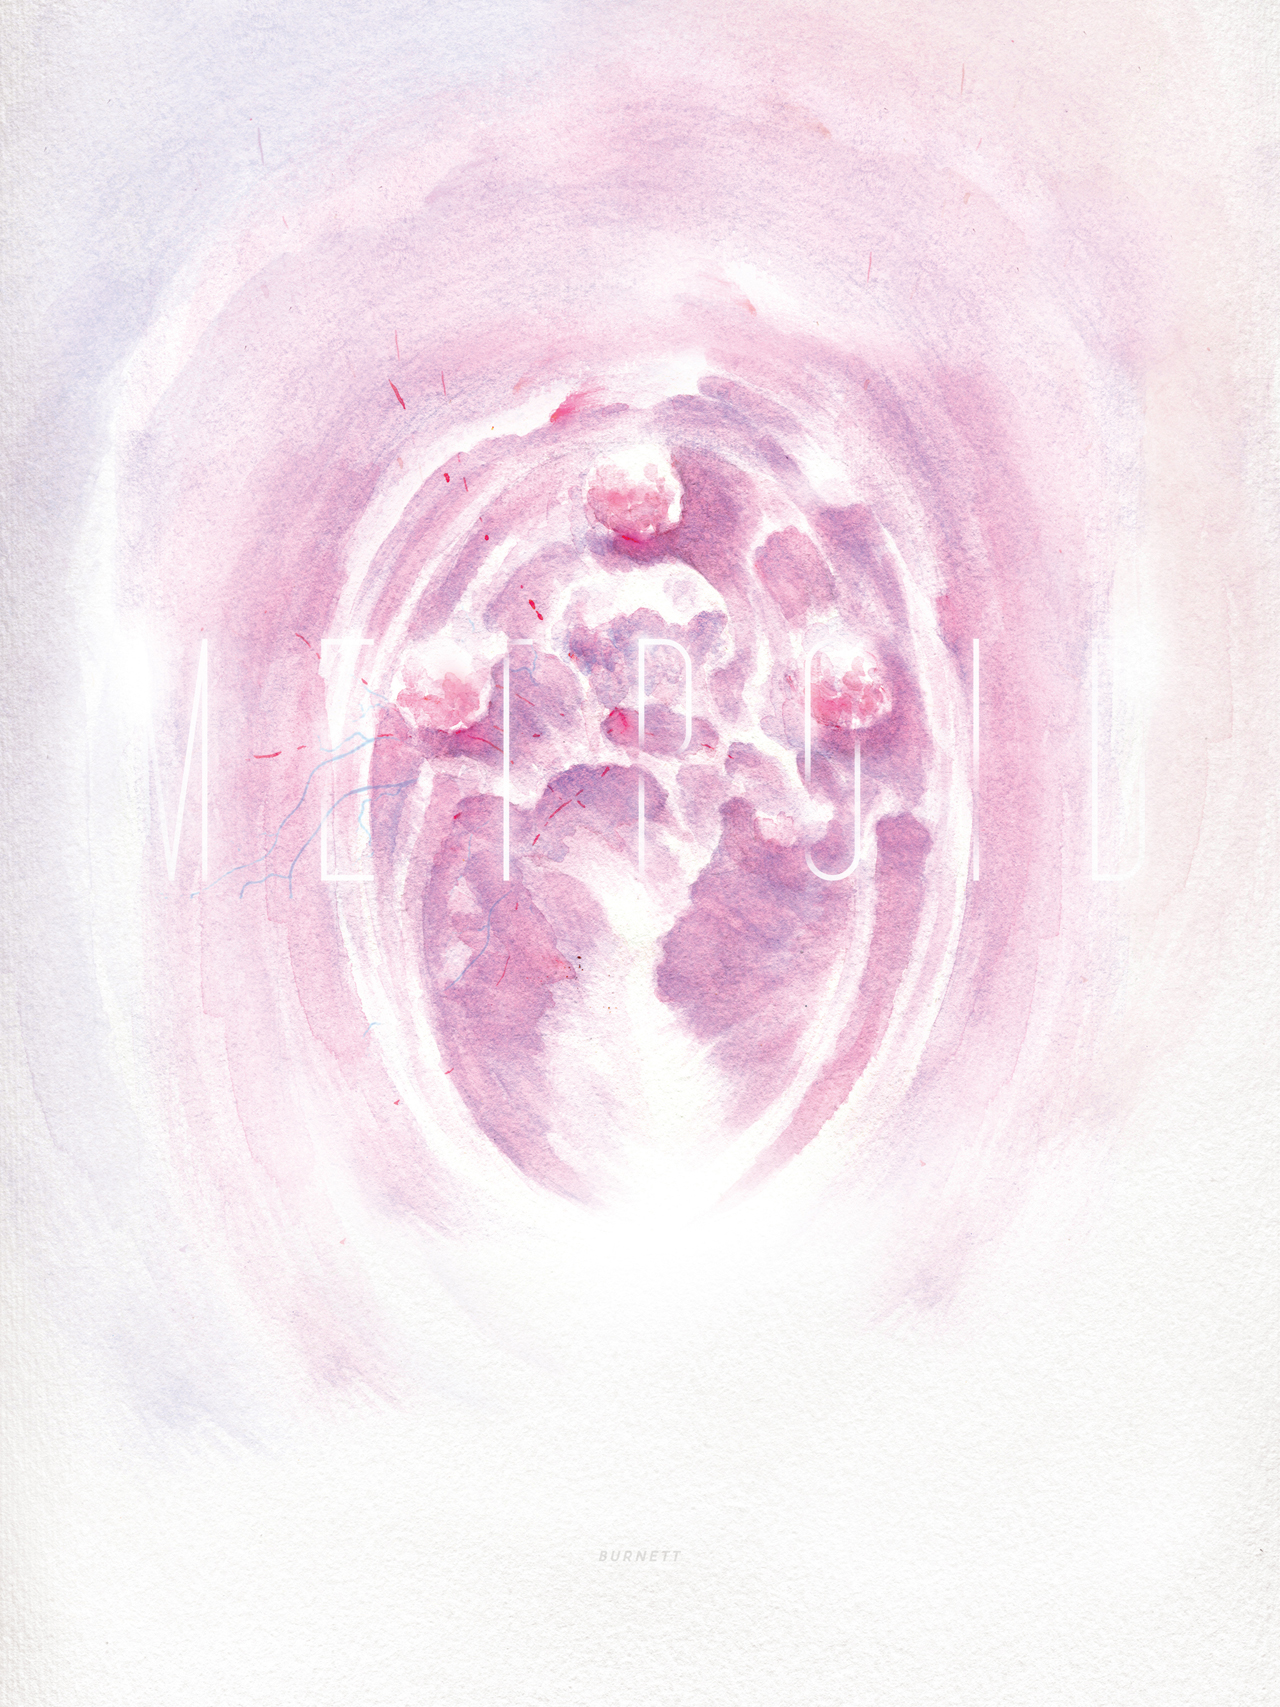 Metroid Poster watercolor abstract painting for sale main